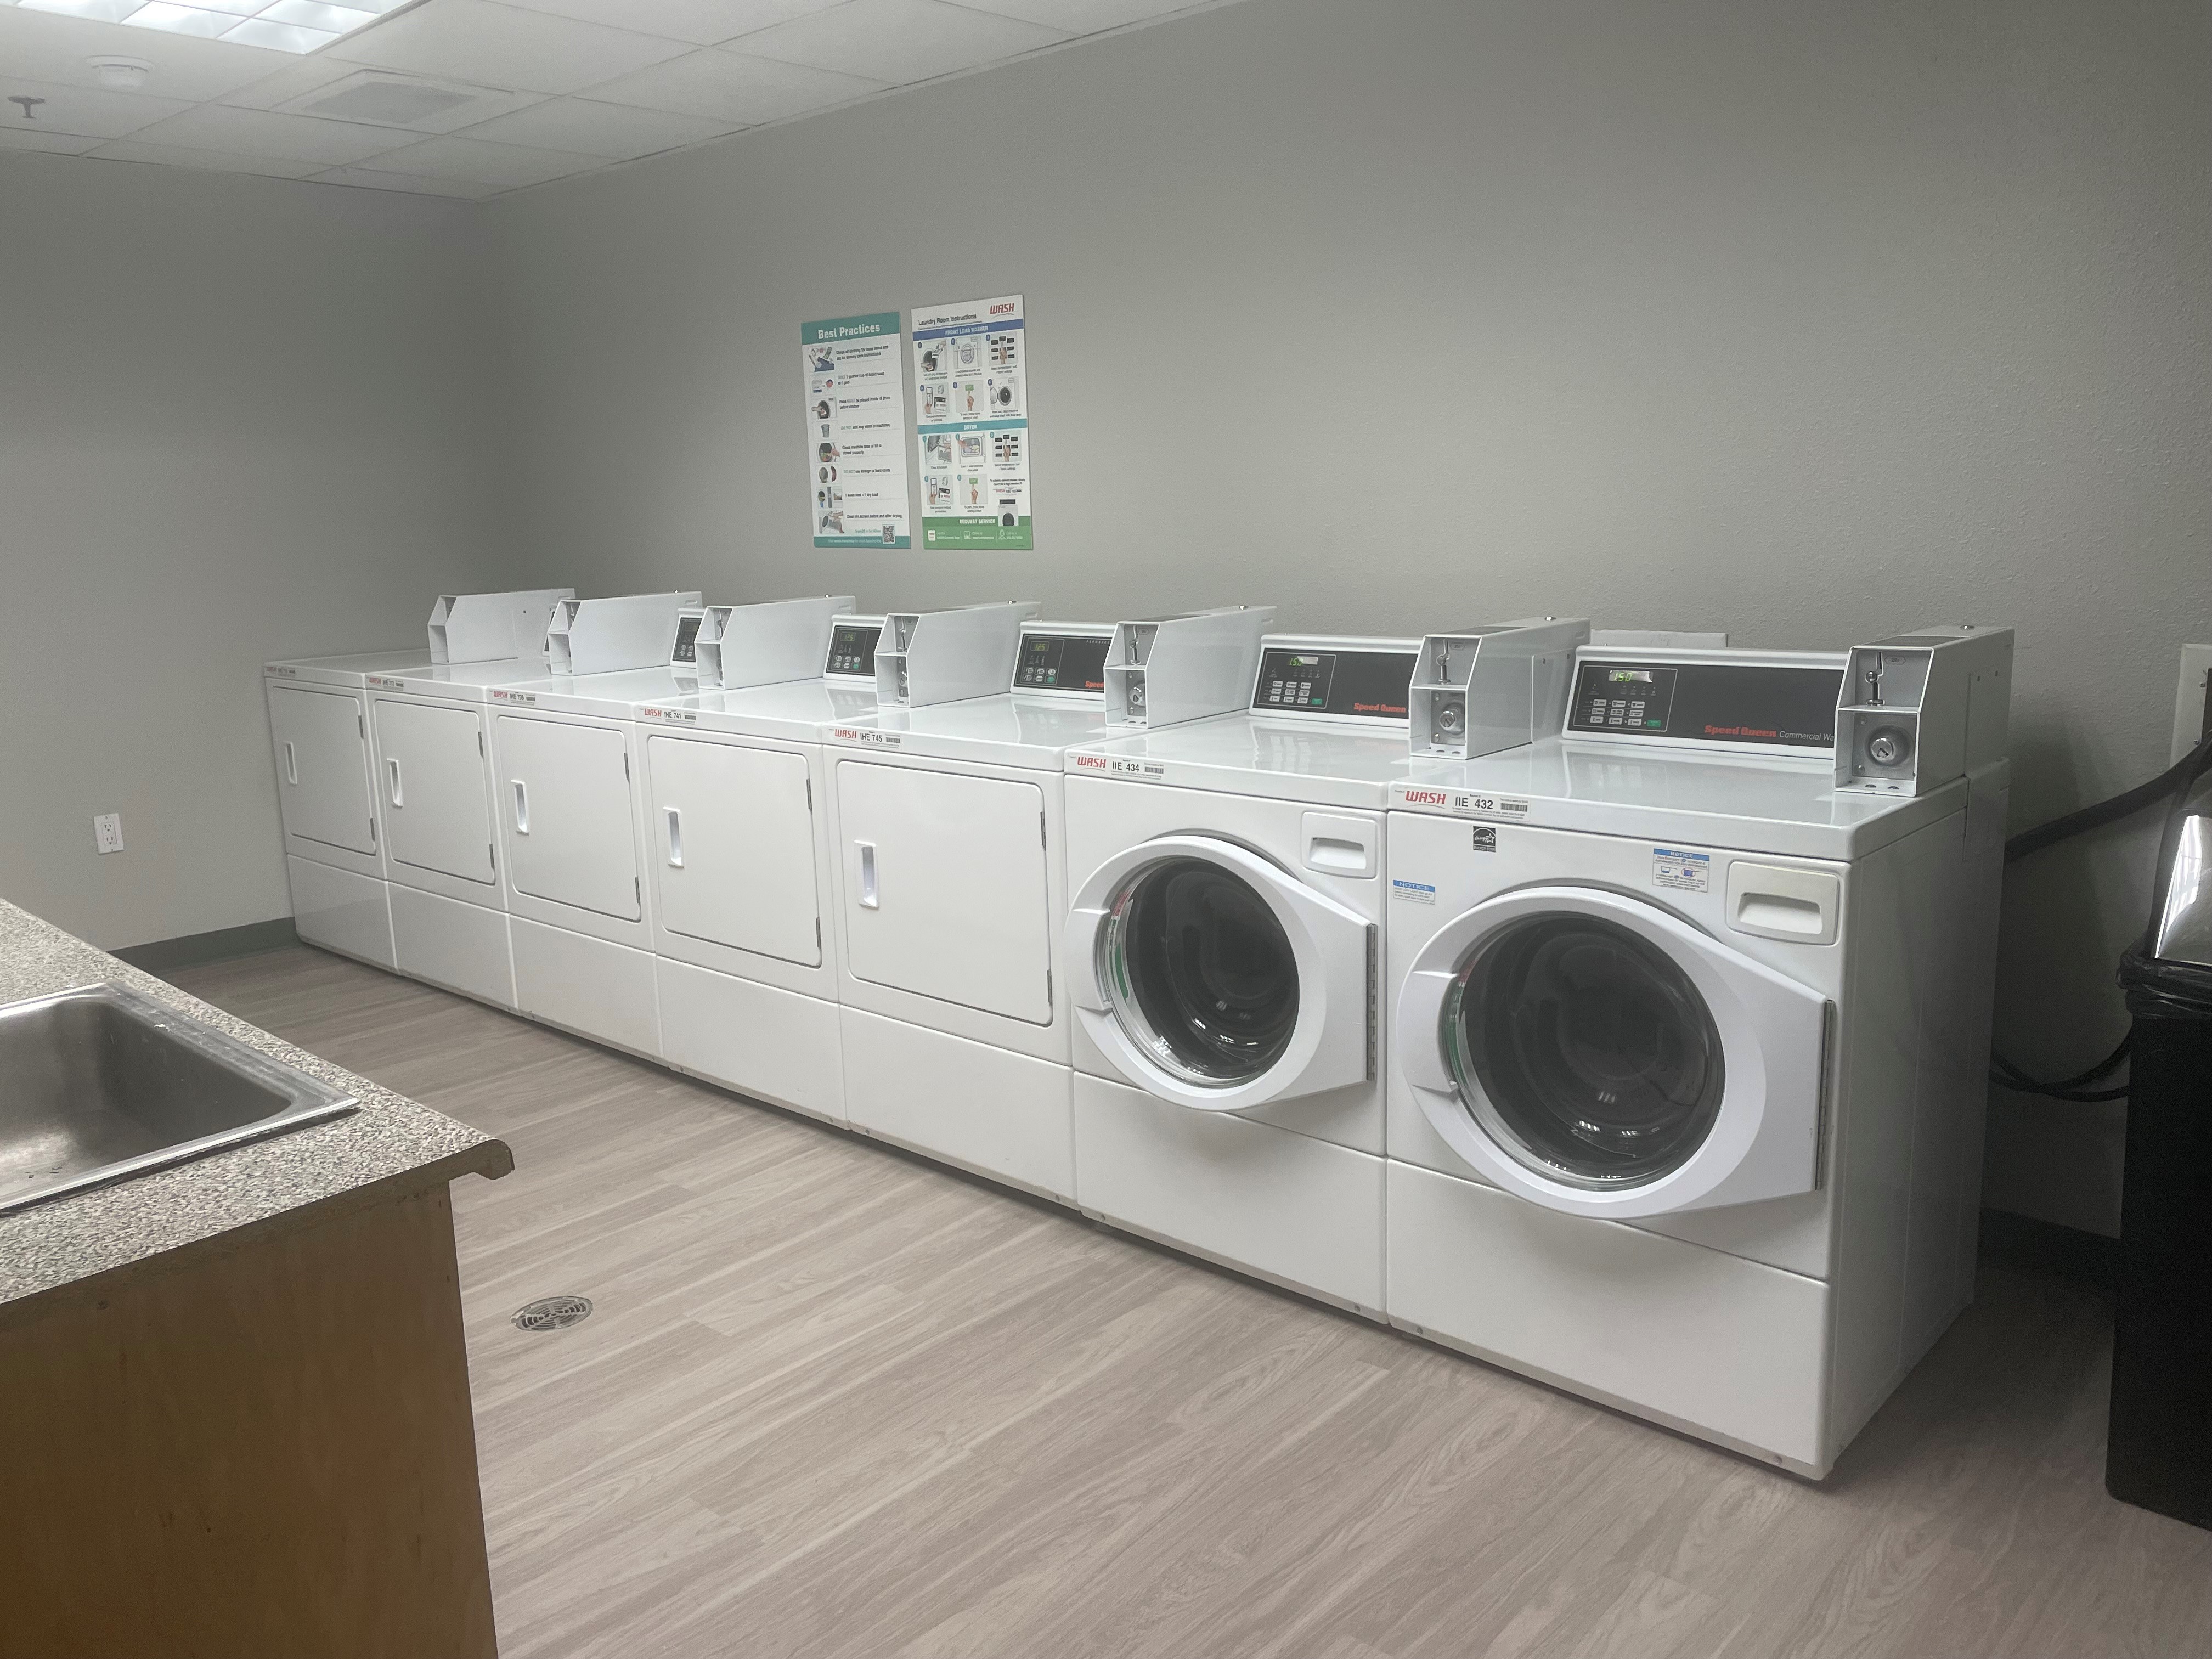 A row of washing machines in the laundry room.